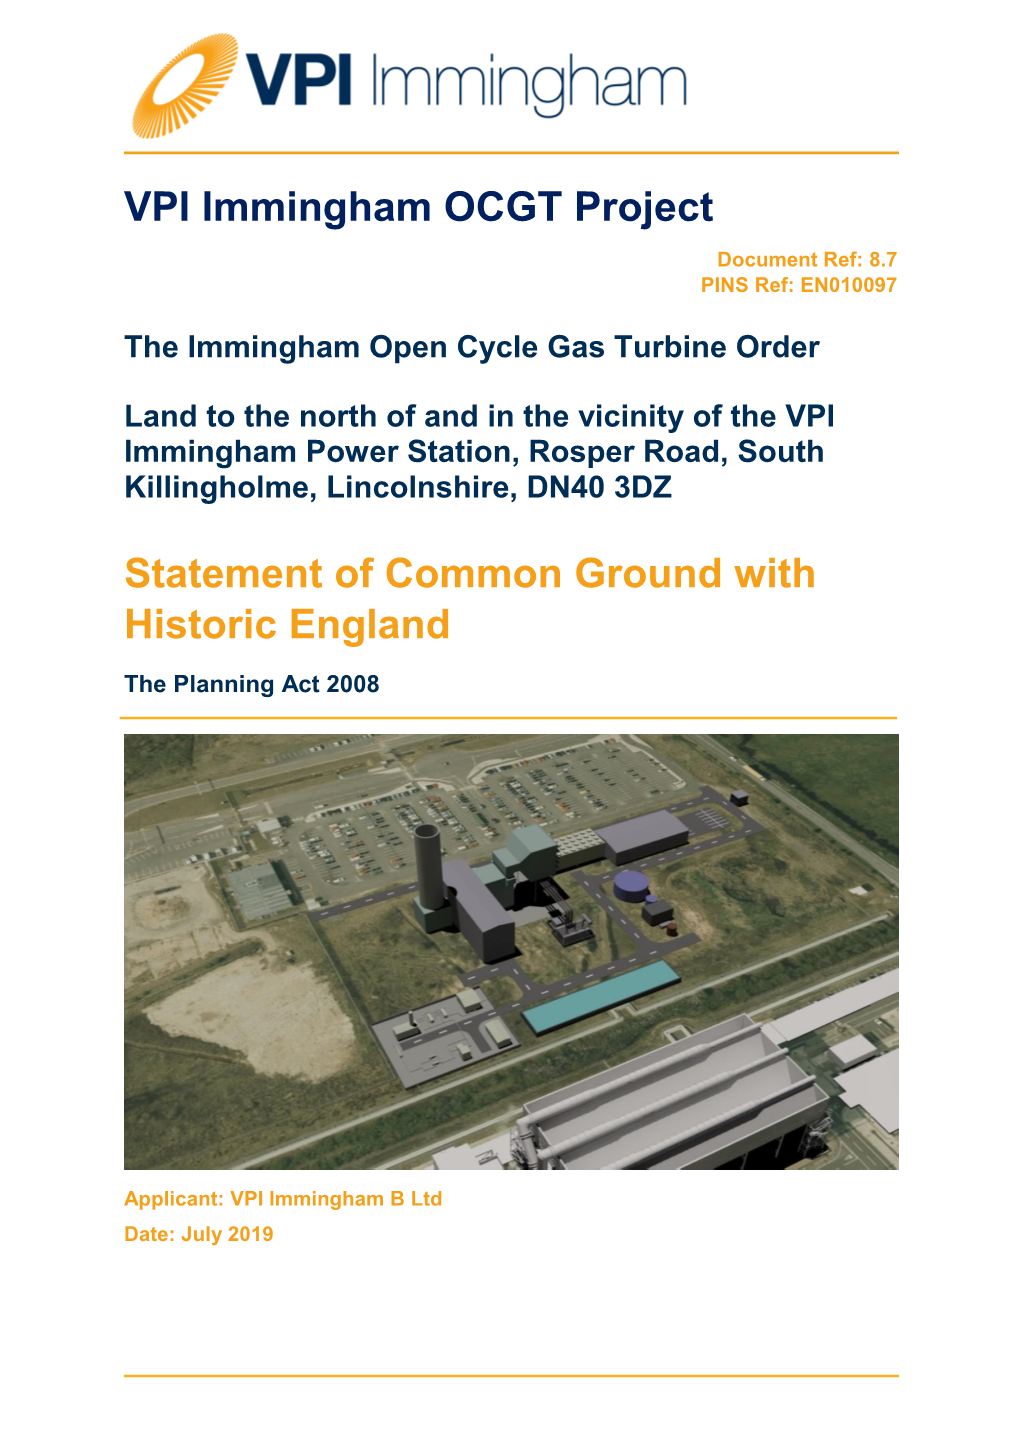 VPI Immingham OCGT Project Statement of Common Ground With